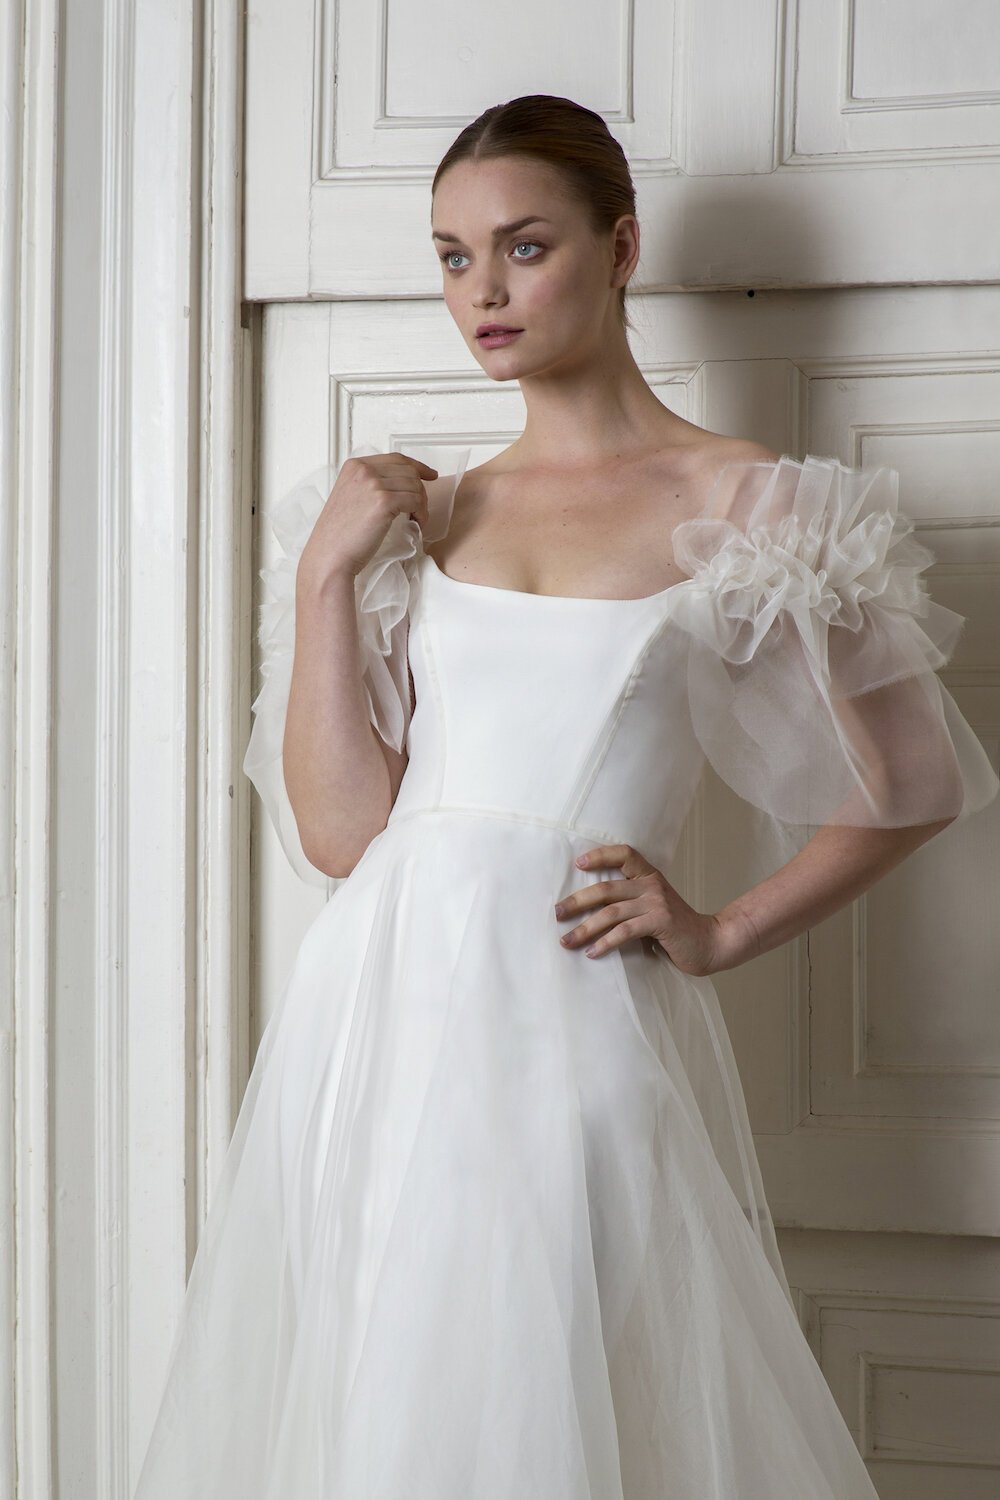 MAYFAIR DRESS — Halfpenny London Wedding dresses and separates in London